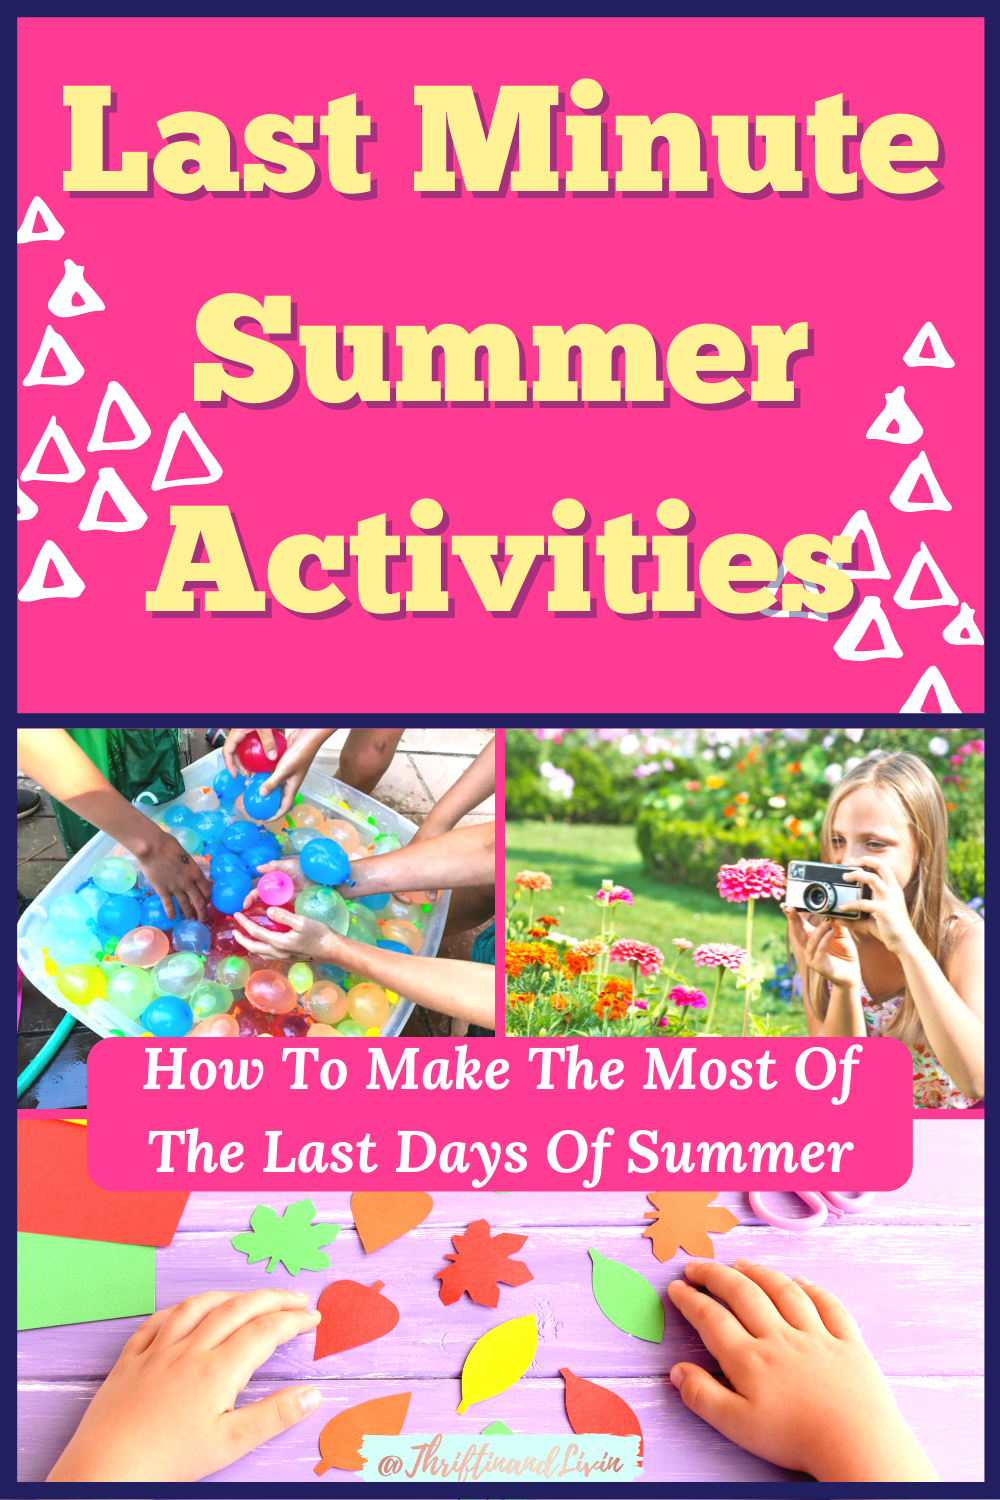 Last Minute Summer Activities - How To Make The Most of The Last Days of Summer - Pink Pinterest Pin Image